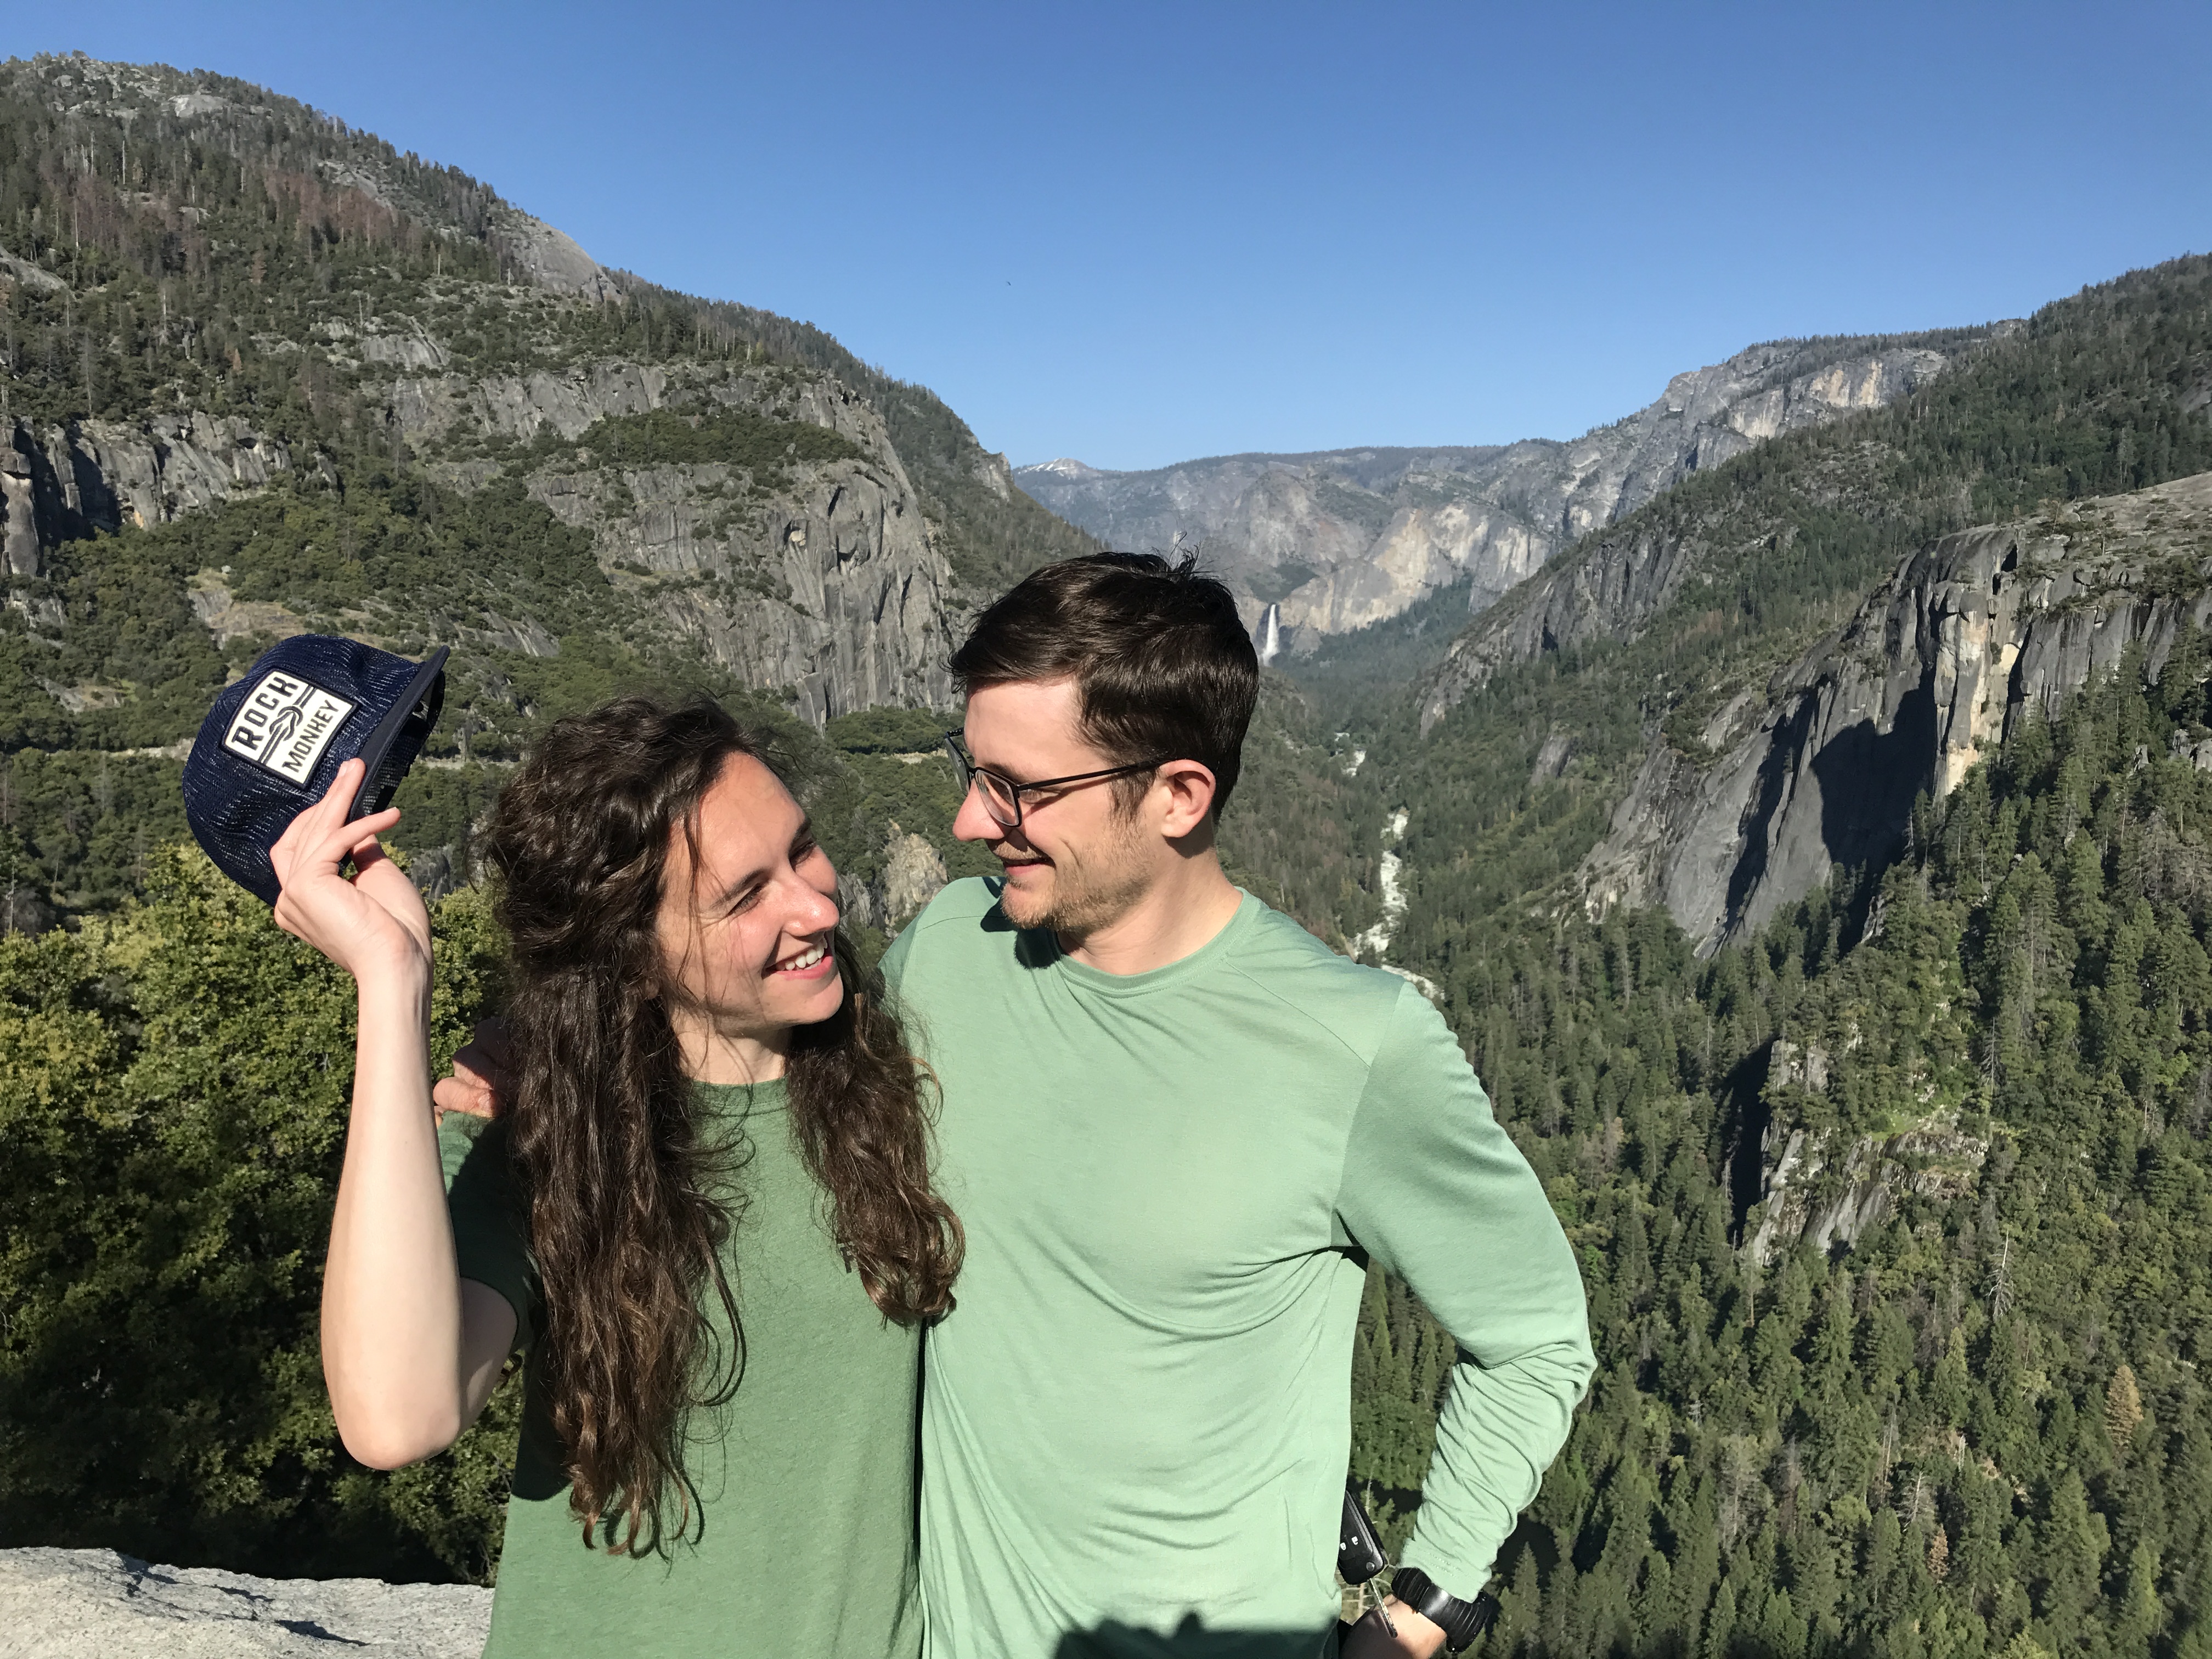 Jackson and Lindsey pose for a pic in front of Tunnel View before the adventures in Yosemite.